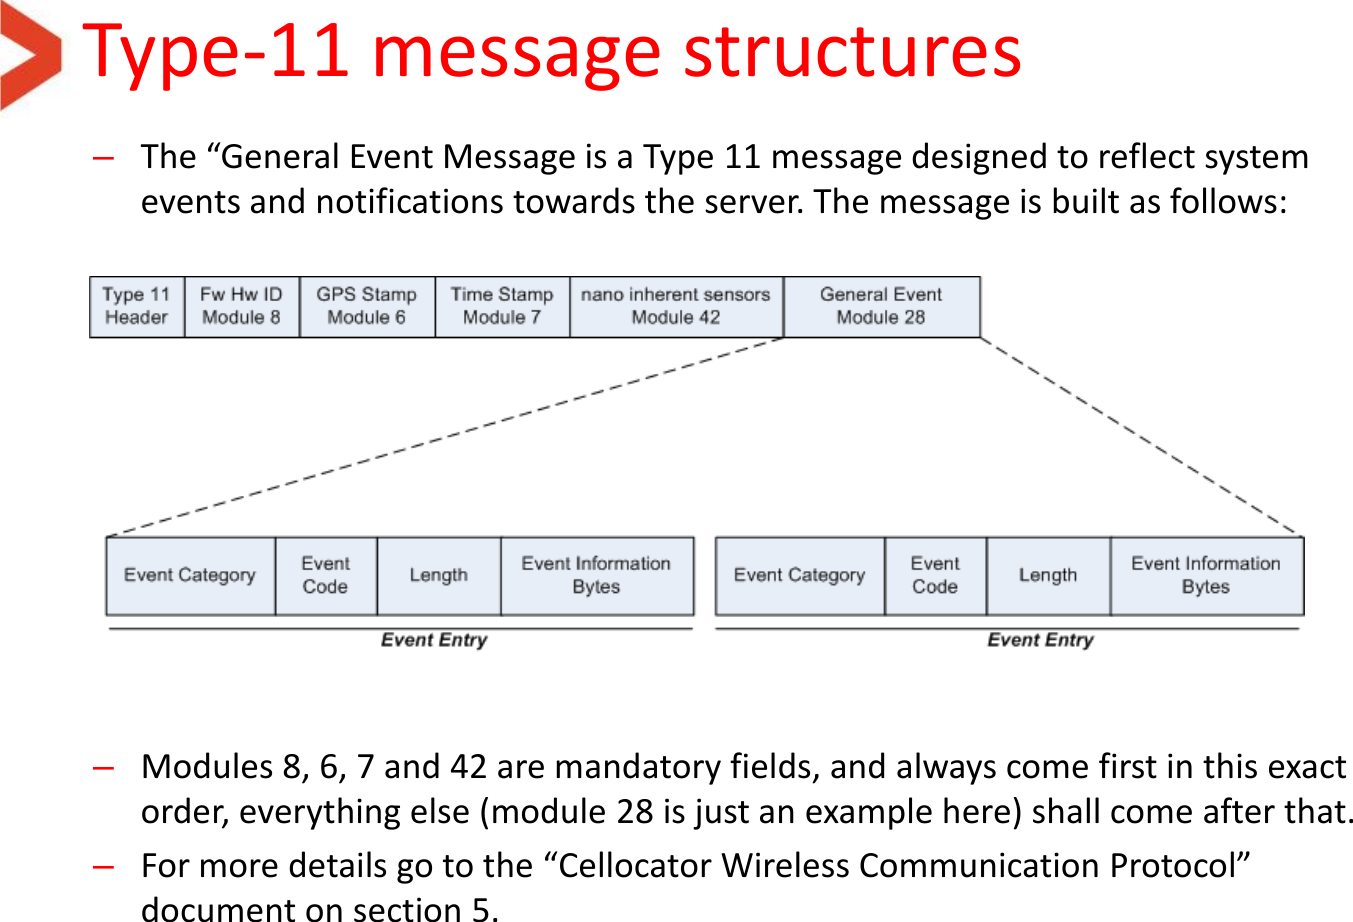 Type-11 message structures  –The “General Event Message is a Type 11 message designed to reflect system events and notifications towards the server. The message is built as follows:           –Modules 8, 6, 7 and 42 are mandatory fields, and always come first in this exact order, everything else (module 28 is just an example here) shall come after that. –For more details go to the “Cellocator Wireless Communication Protocol” document on section 5.   